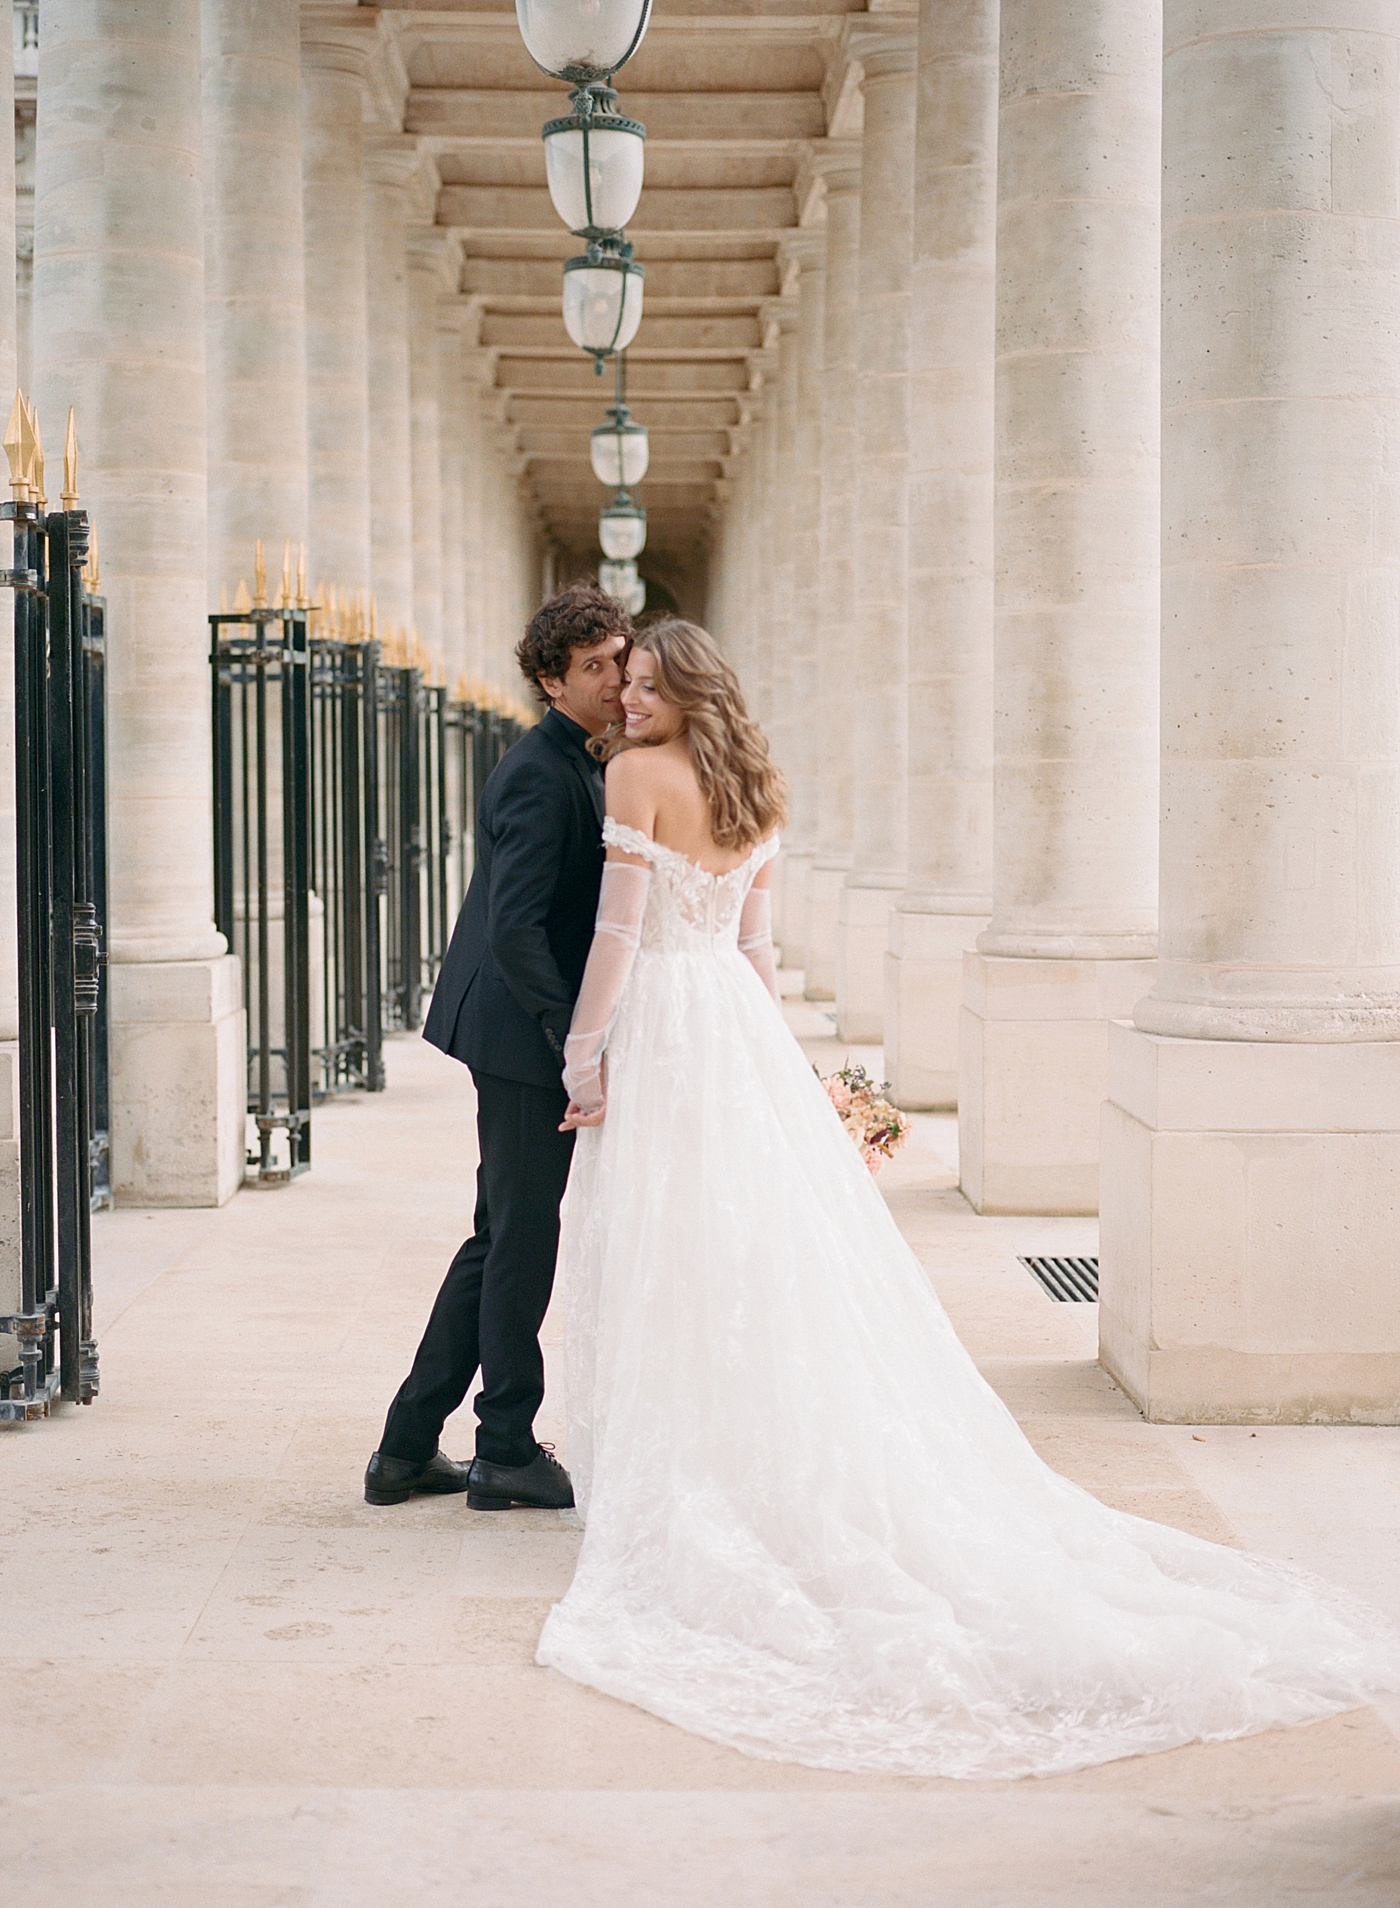 Image of a bride and groom holding hands, kissing, and smiling back at the camera while walking away down an outdoor, sunlit, concrete corridor | Image by Hope Helmuth Photography